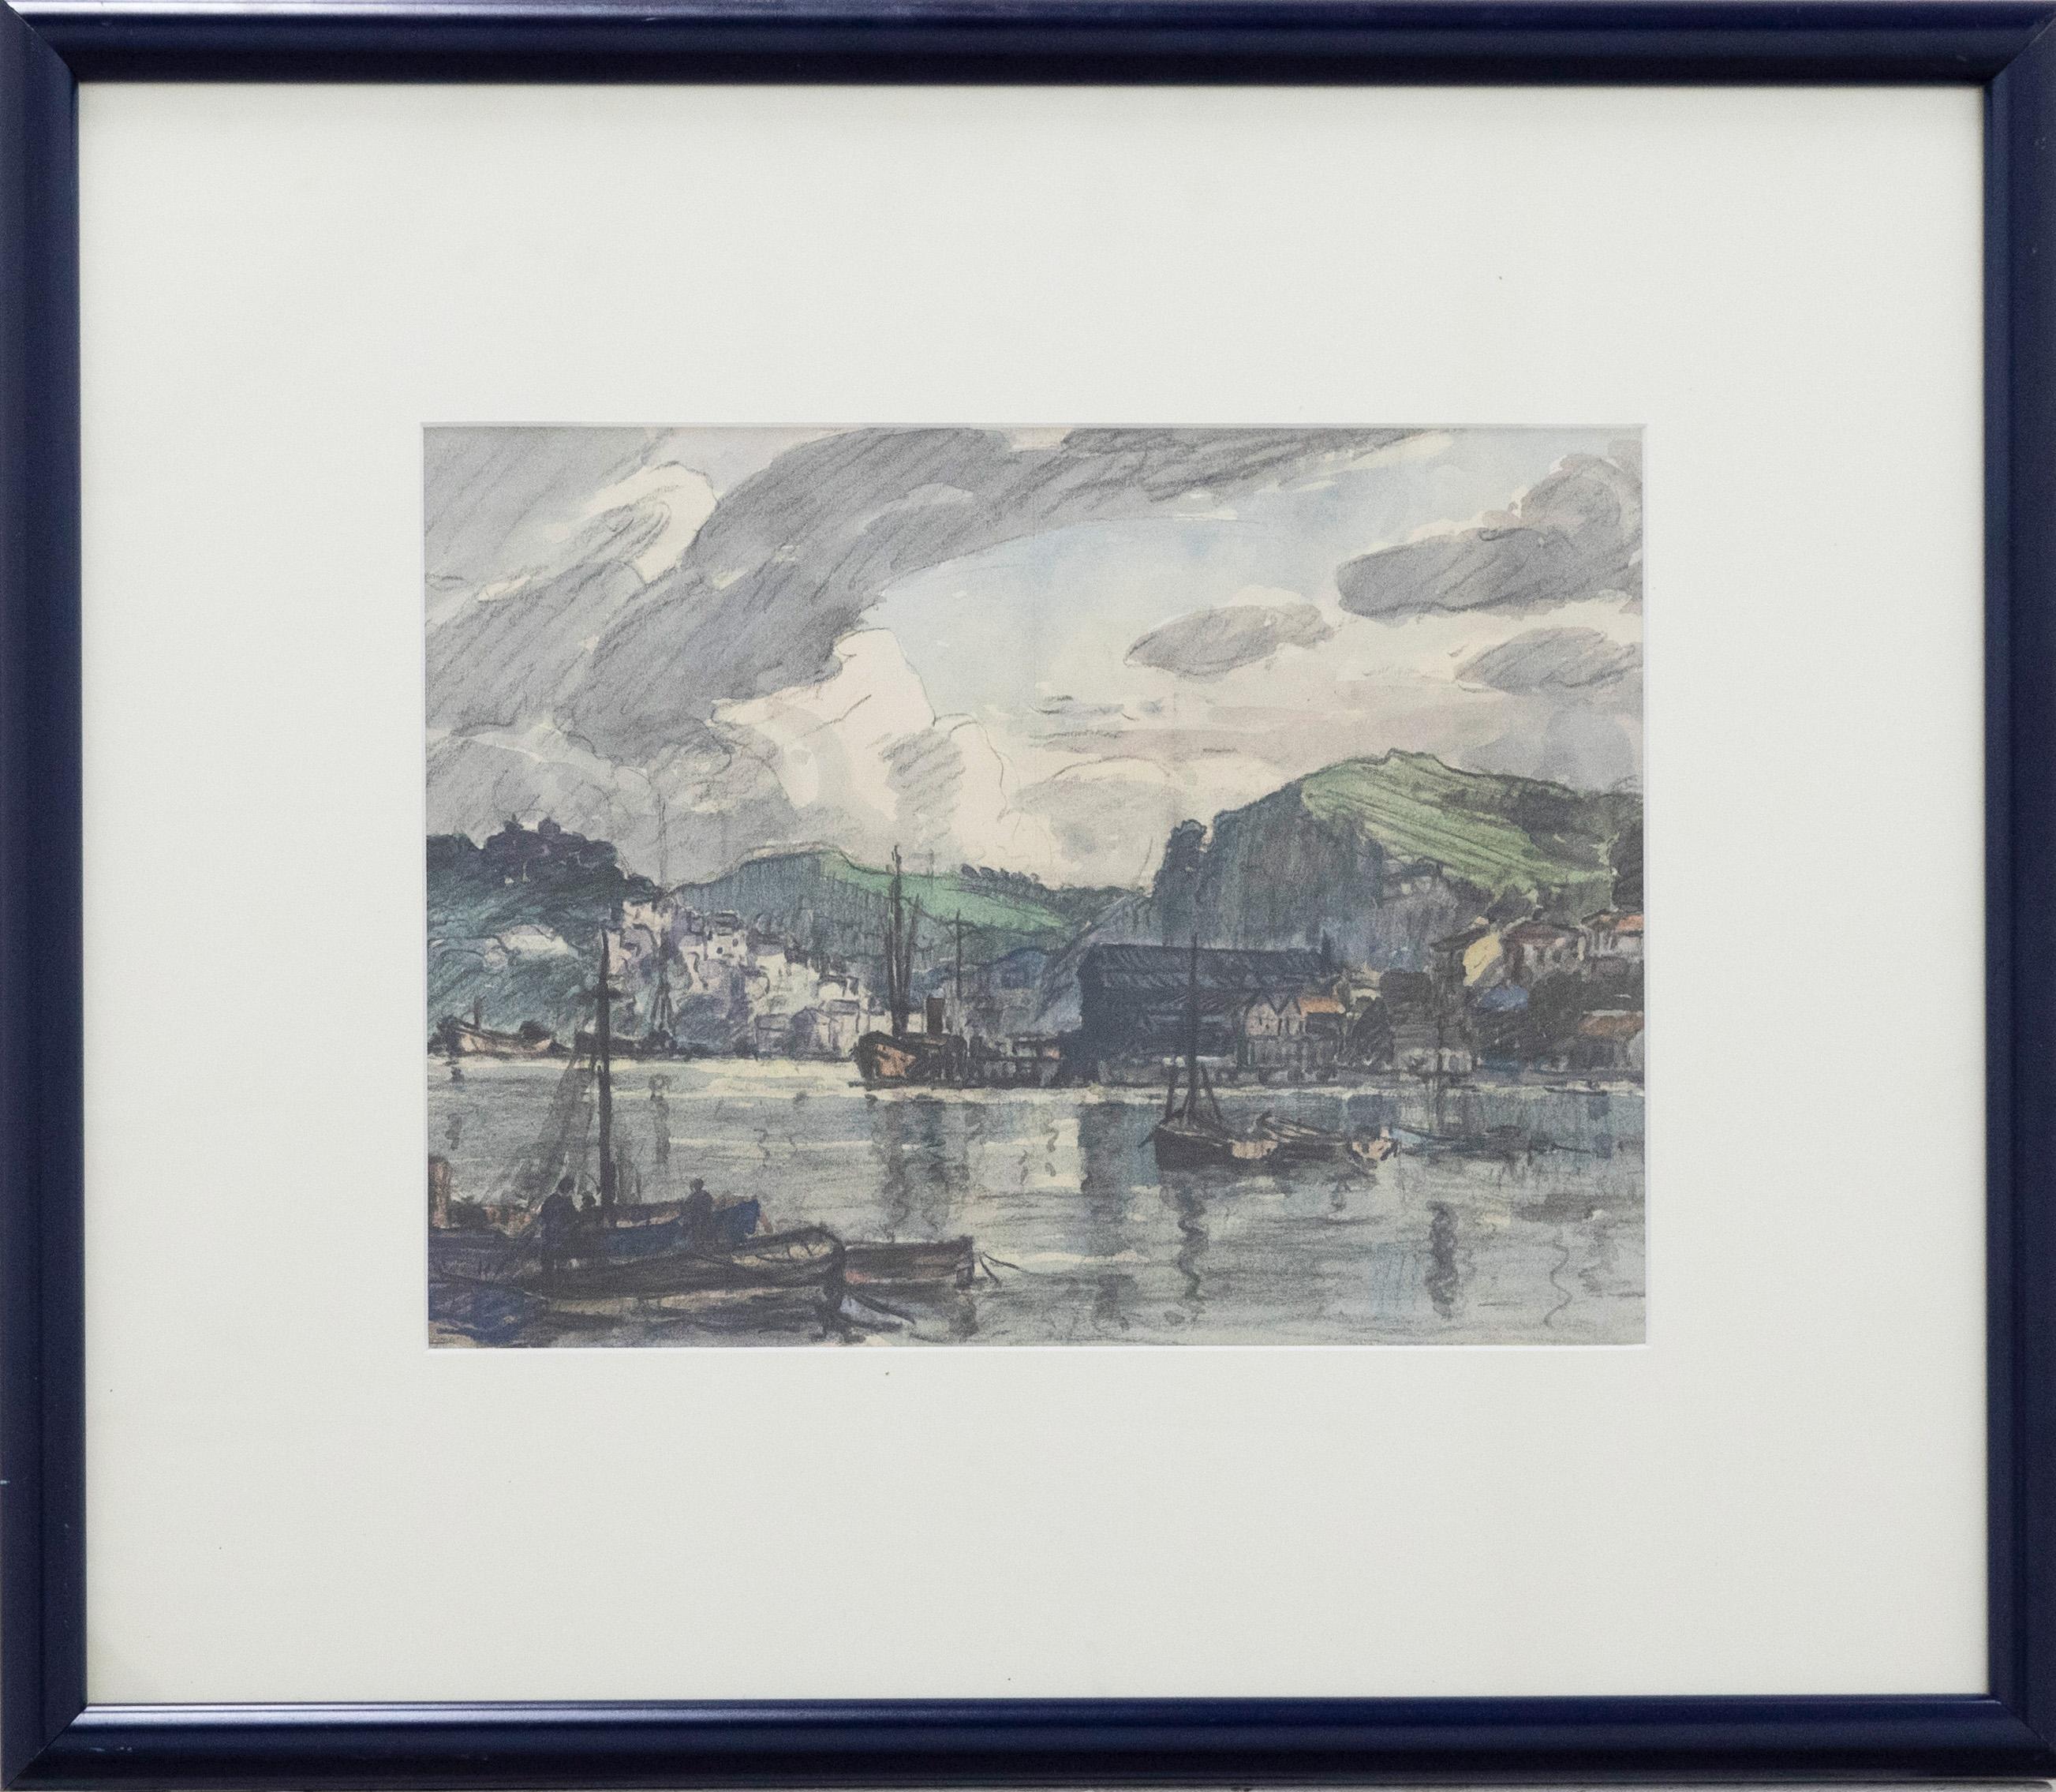 An expressive preparatory drawing and watercolour study by the artist John Edmund Mace. Well-presented in a striking dark blue frame with a new card mount. Unsigned. On paper.